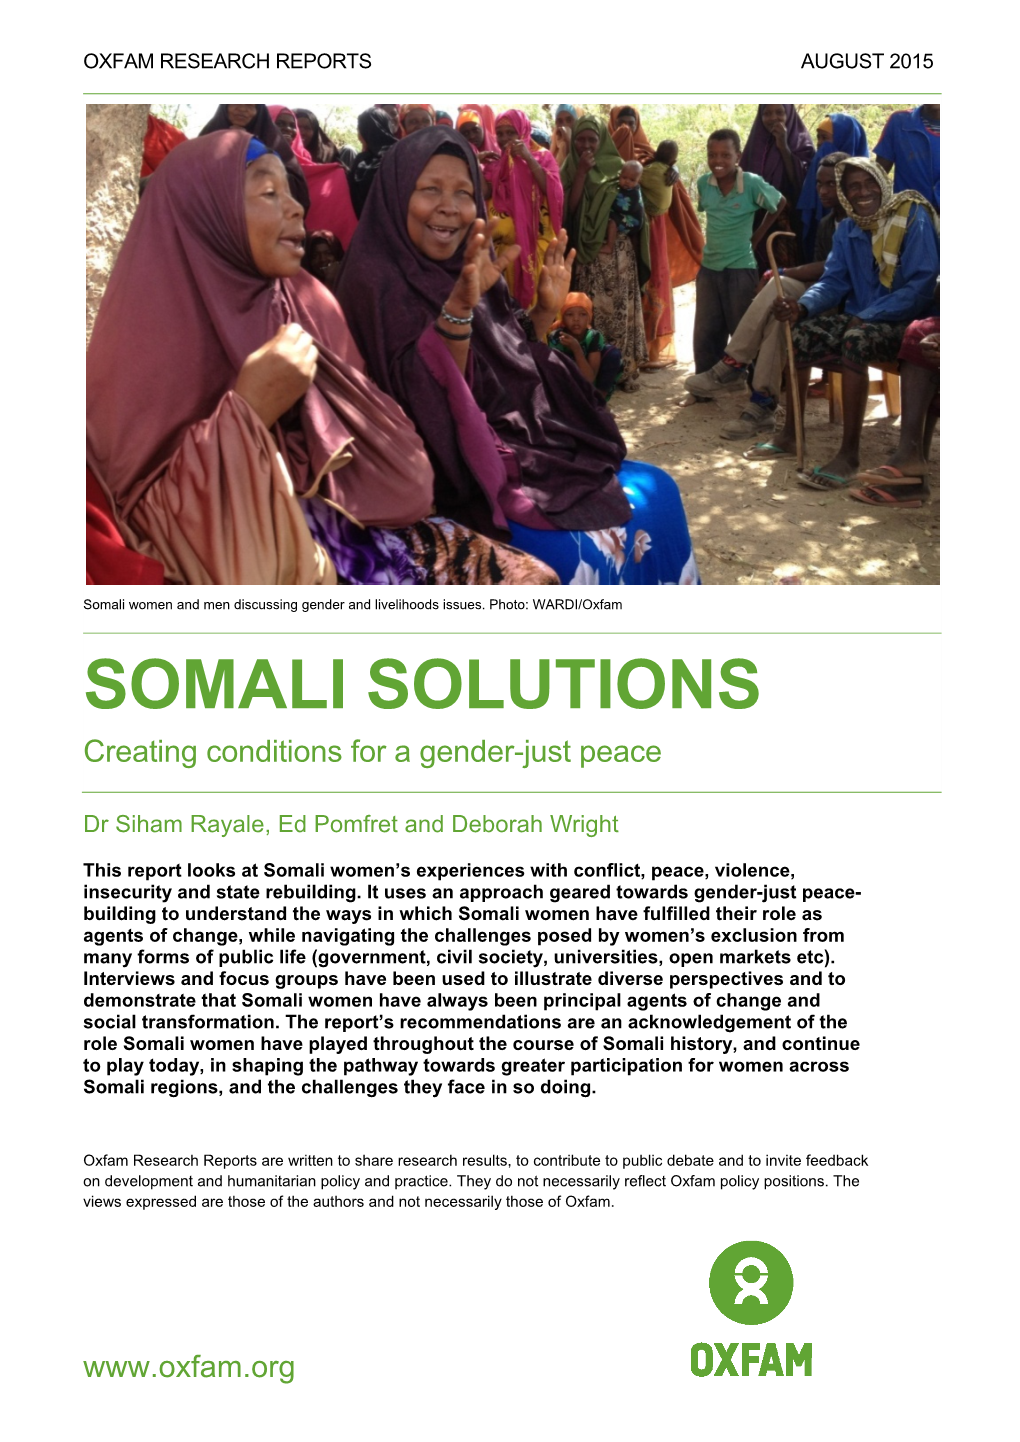 Somali Solutions: Creating Conditions for a Gender-Just Peace 2 ABBREVIATIONS